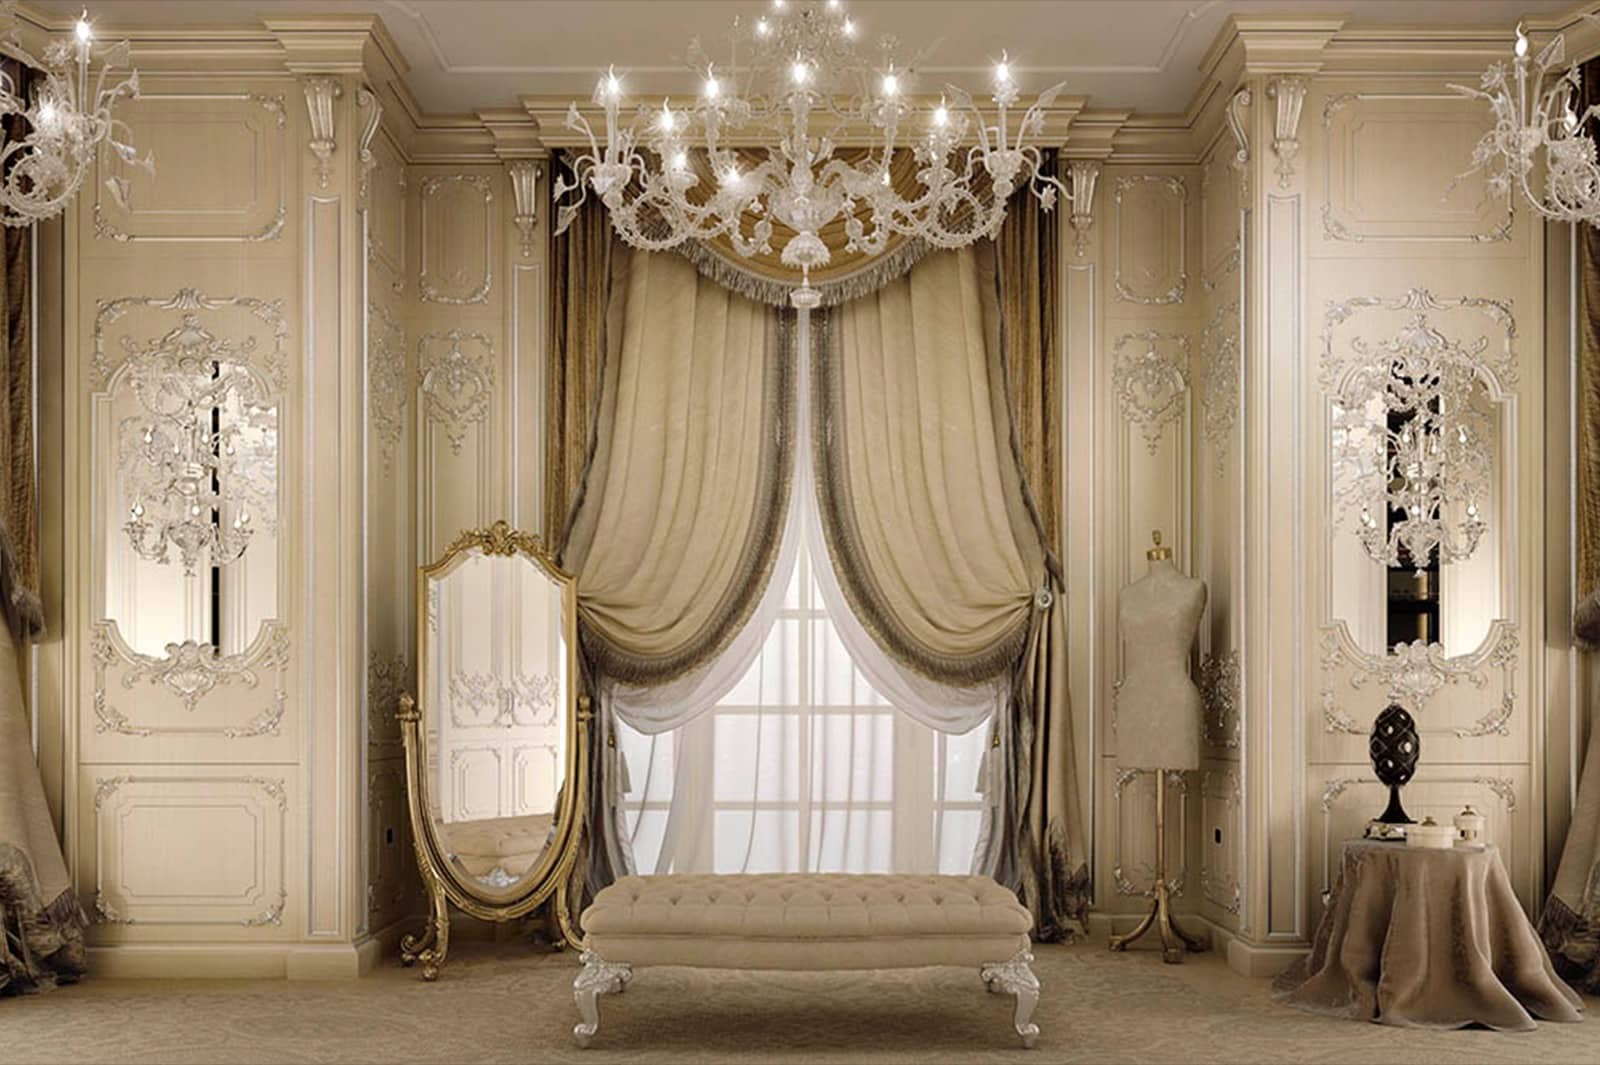 decoration of classic luxury villa with curtains panels boiserie accessories wallpaper chandelier Swarovski gold details elegant fabrics best quality made in Italy ideas